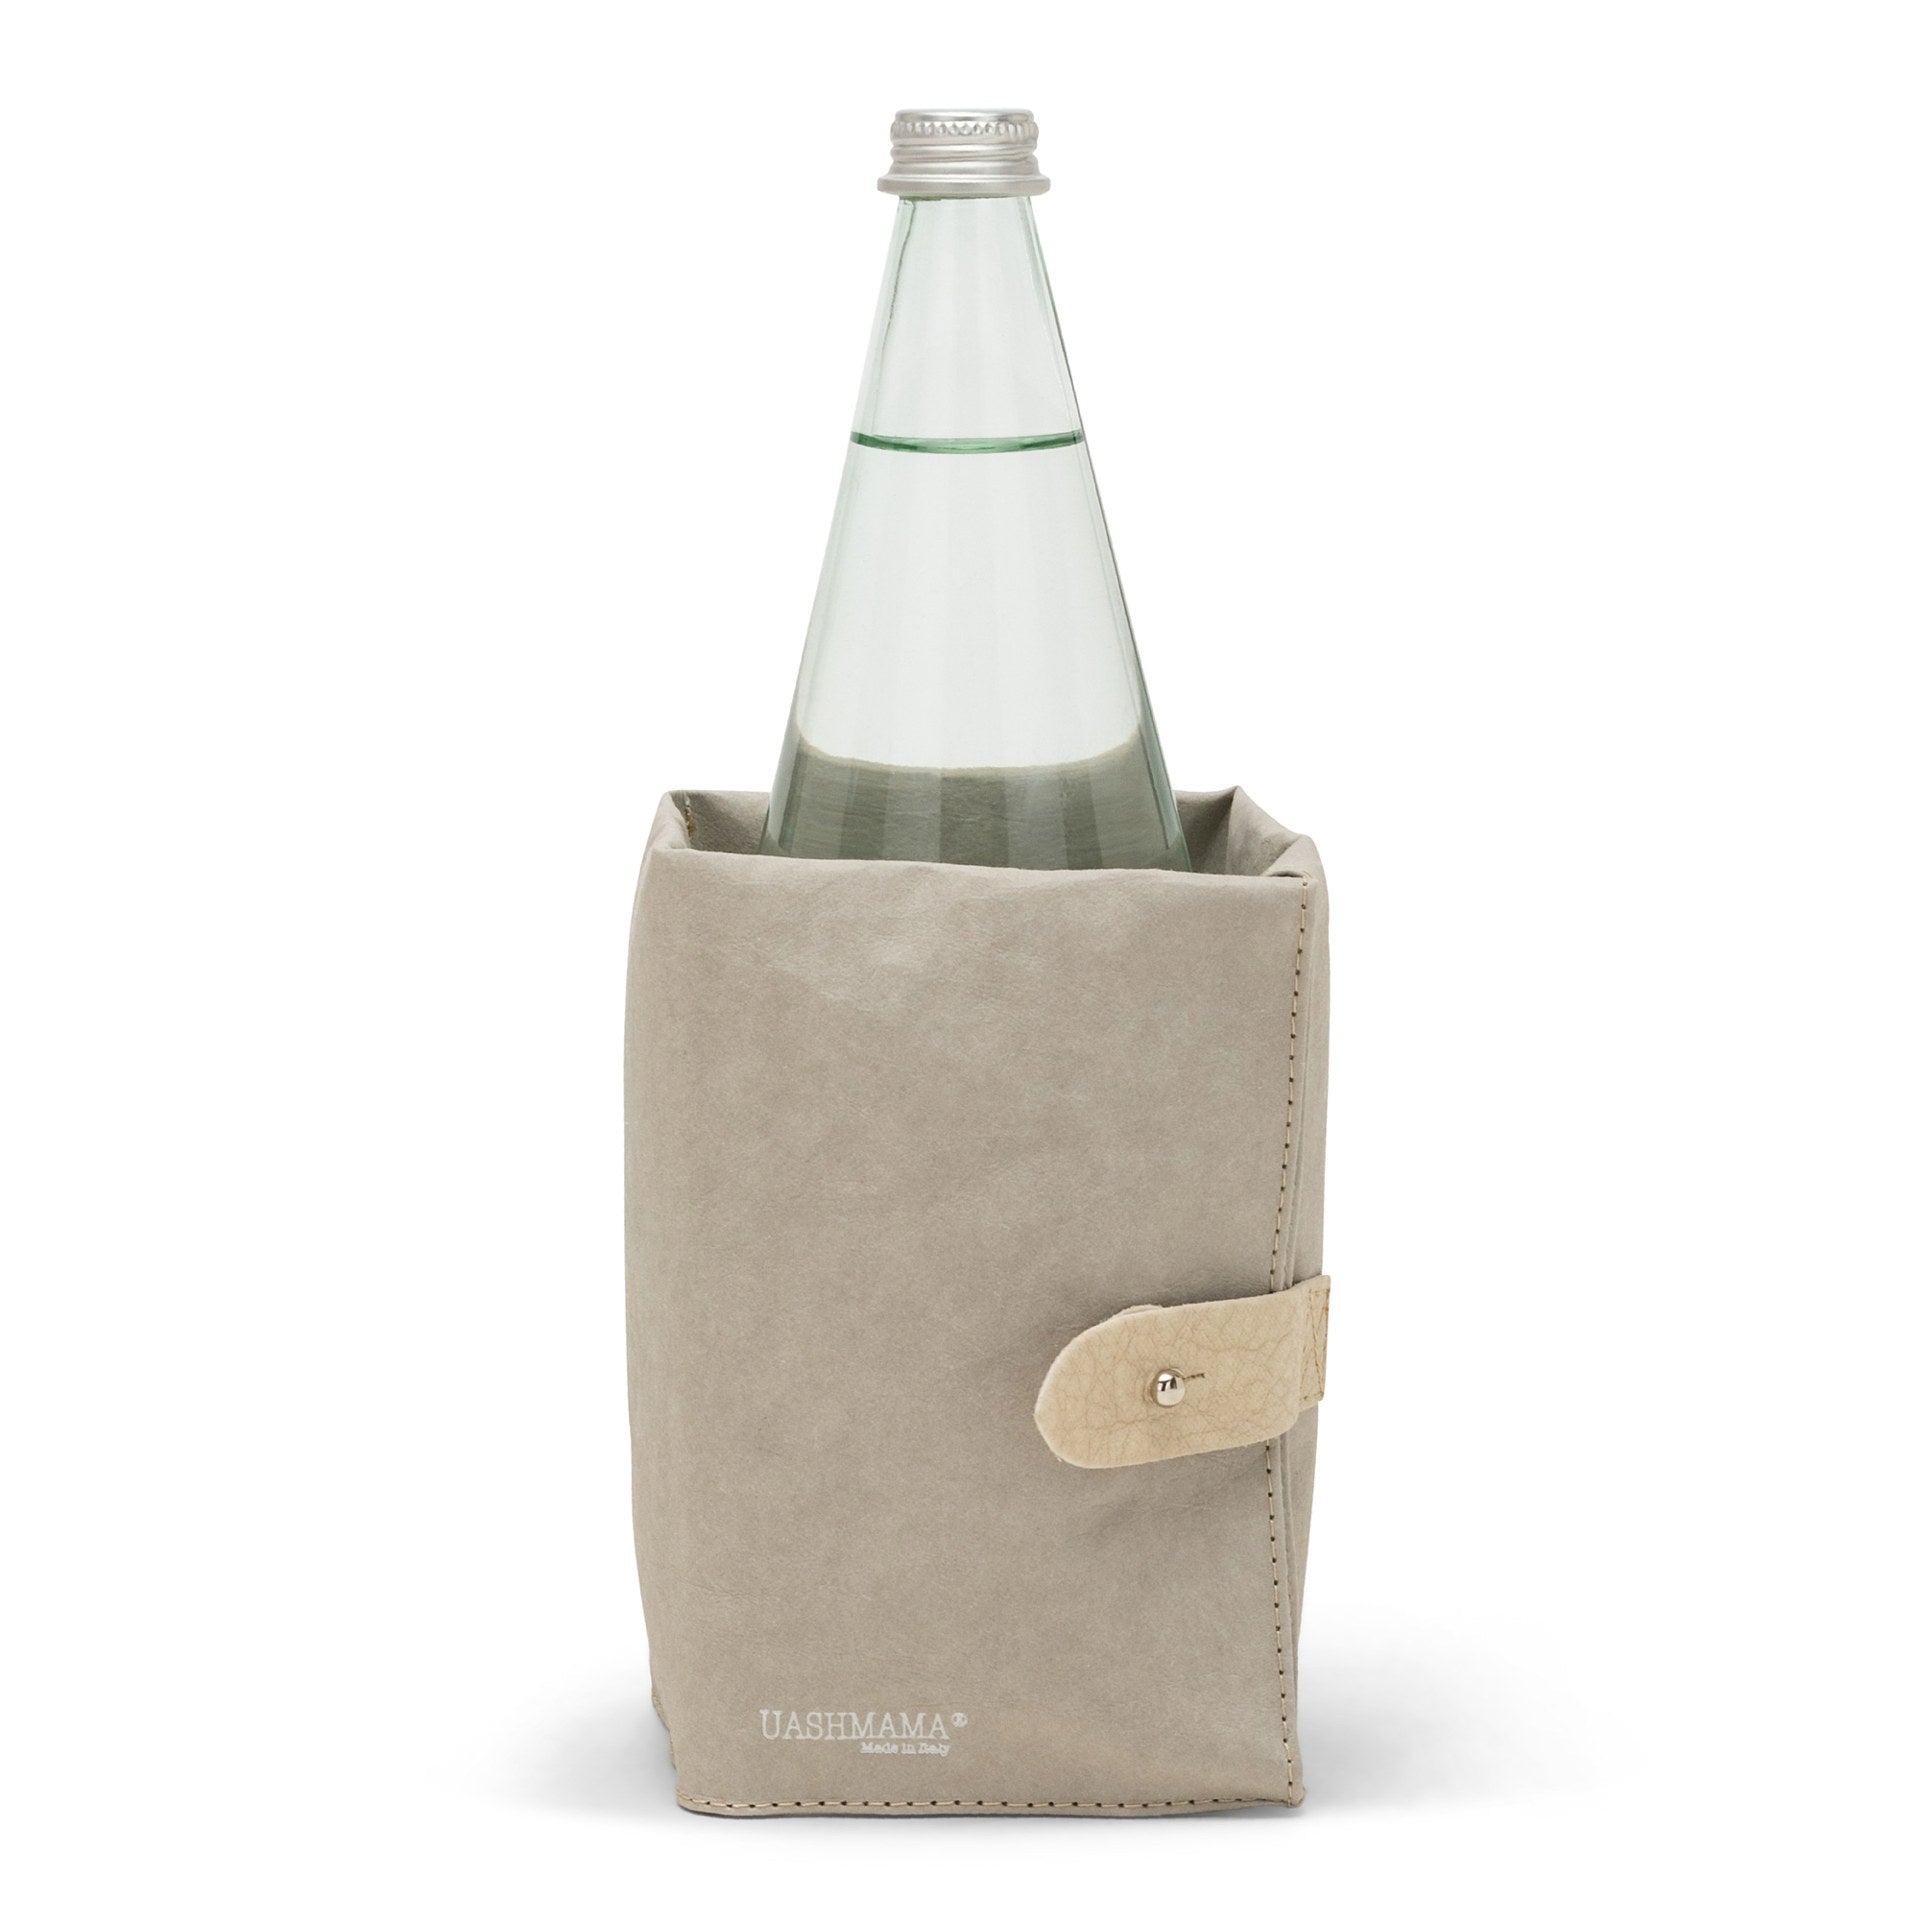 A beige washable paper cooler is shown with a washable paper side tab with silver stud. It contains a glass water bottle.